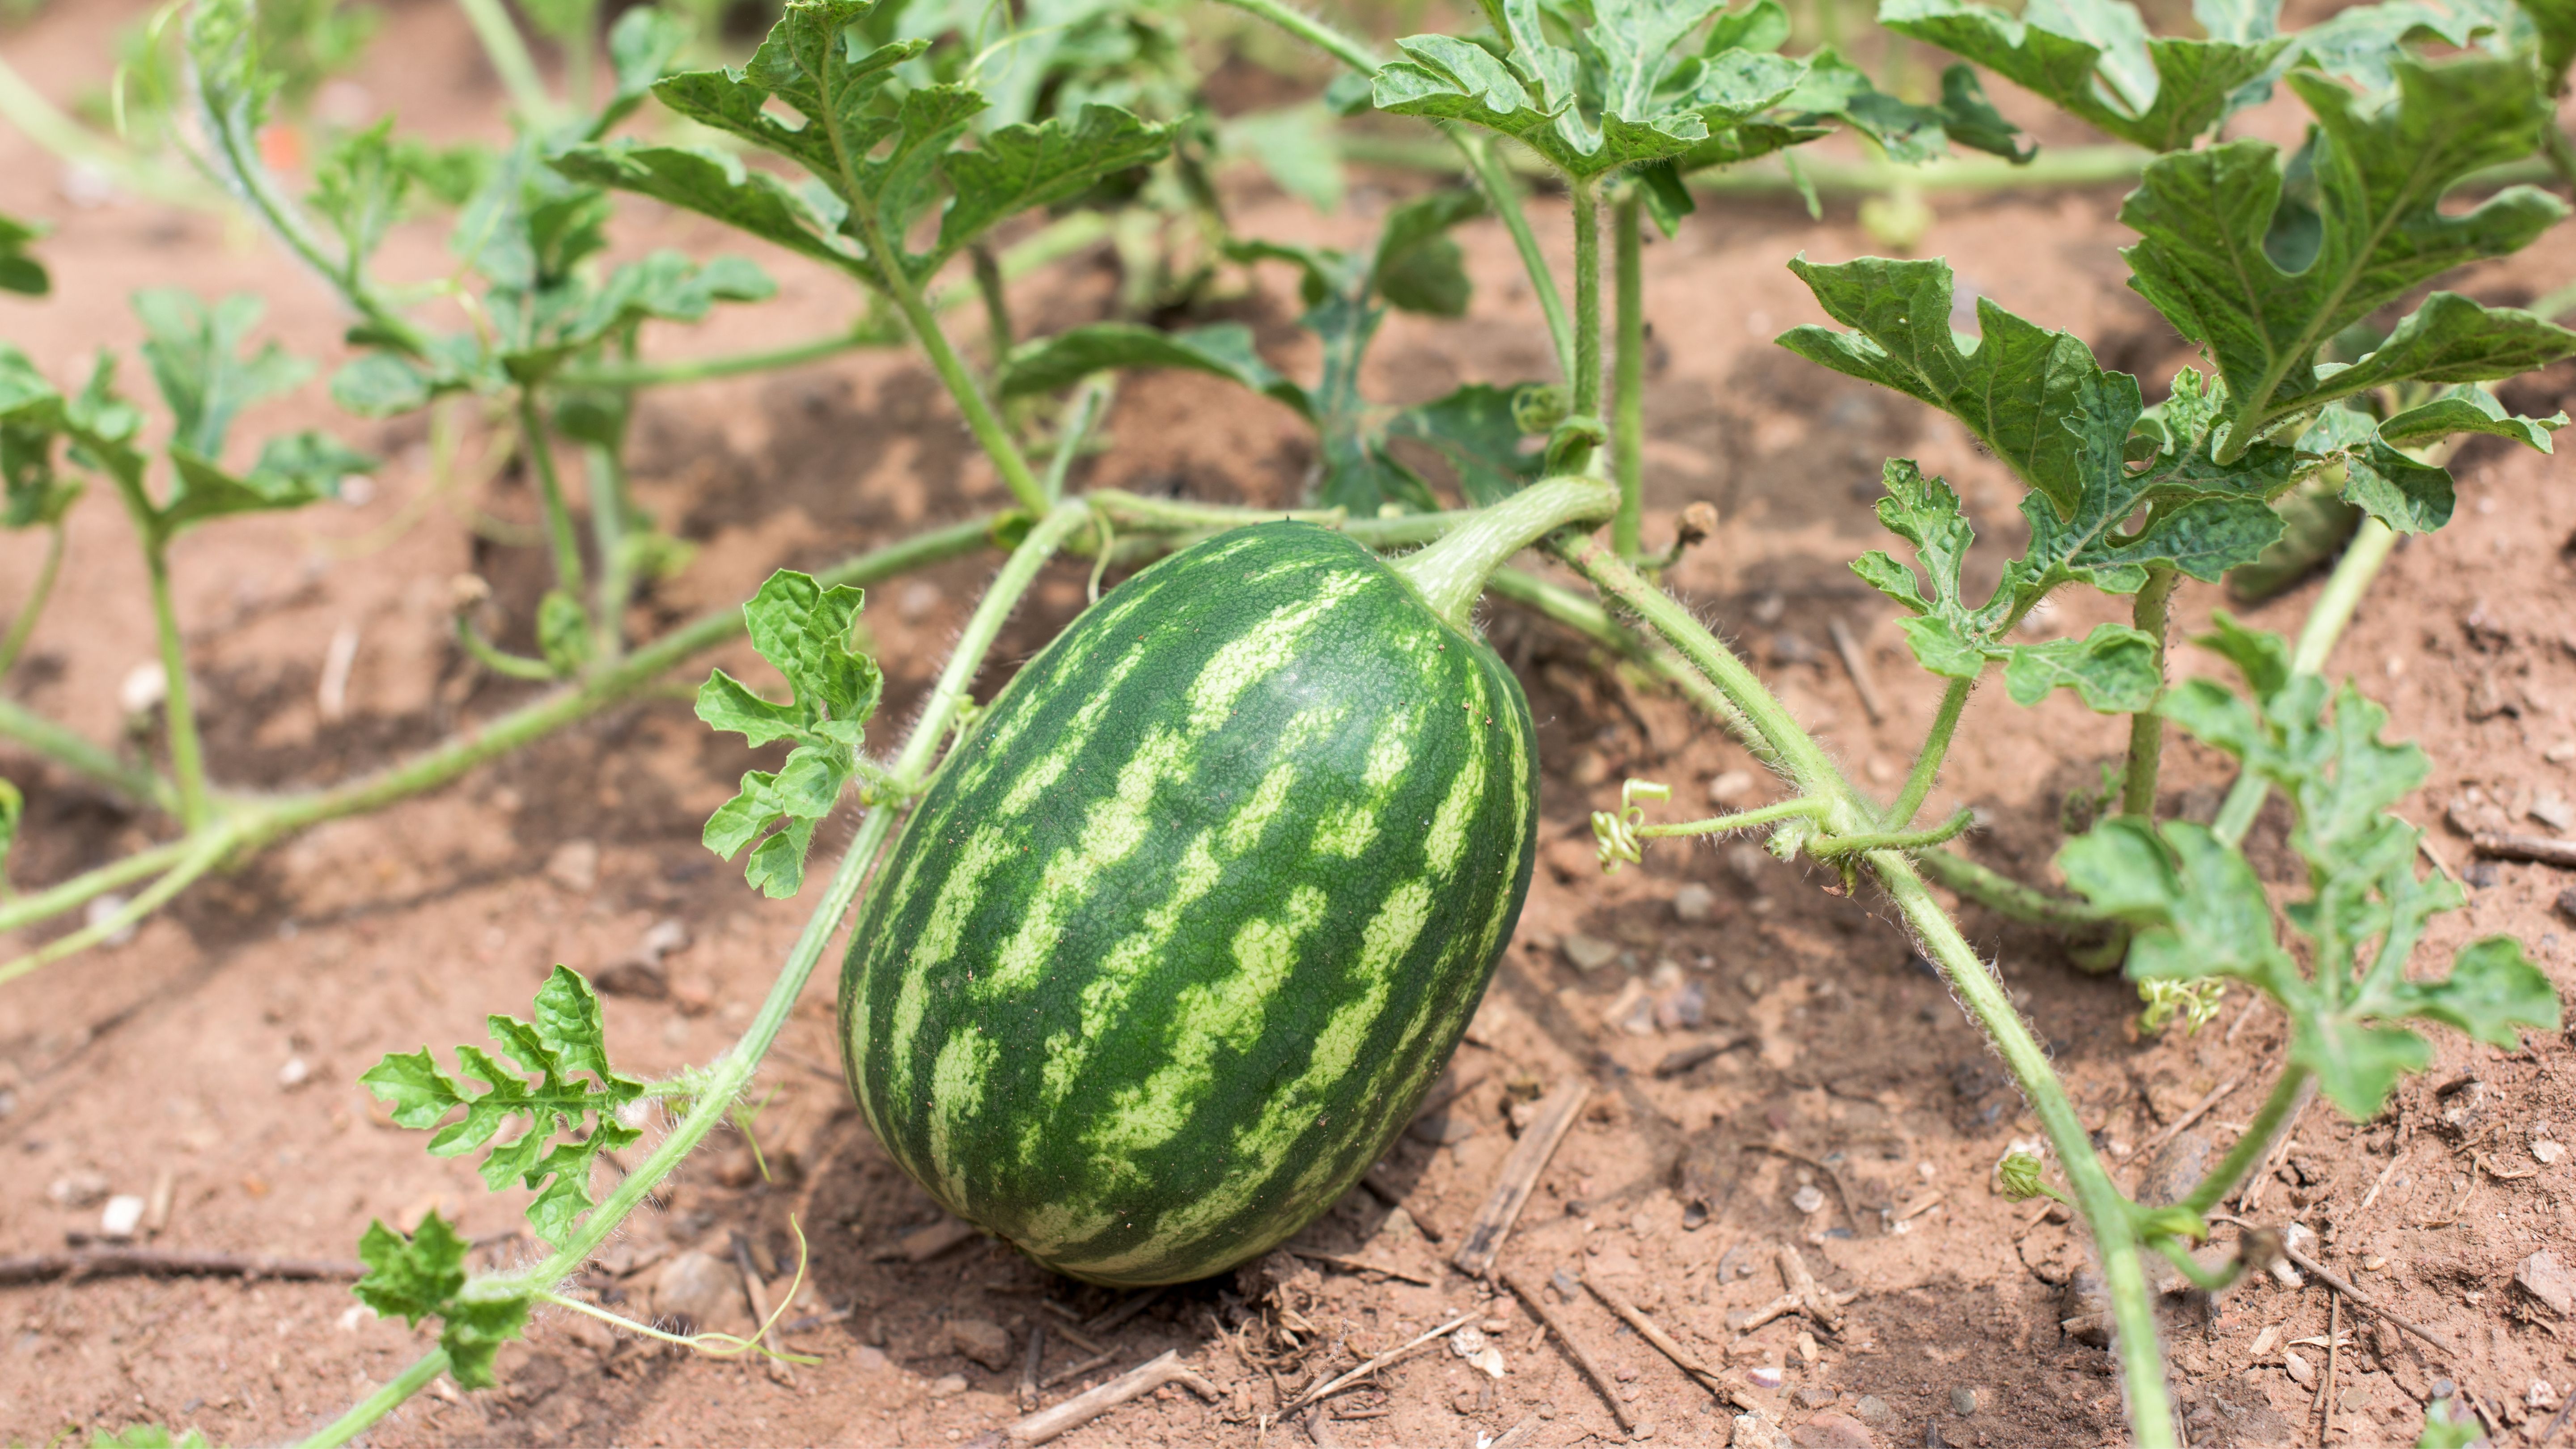 Overview of Melon Pests